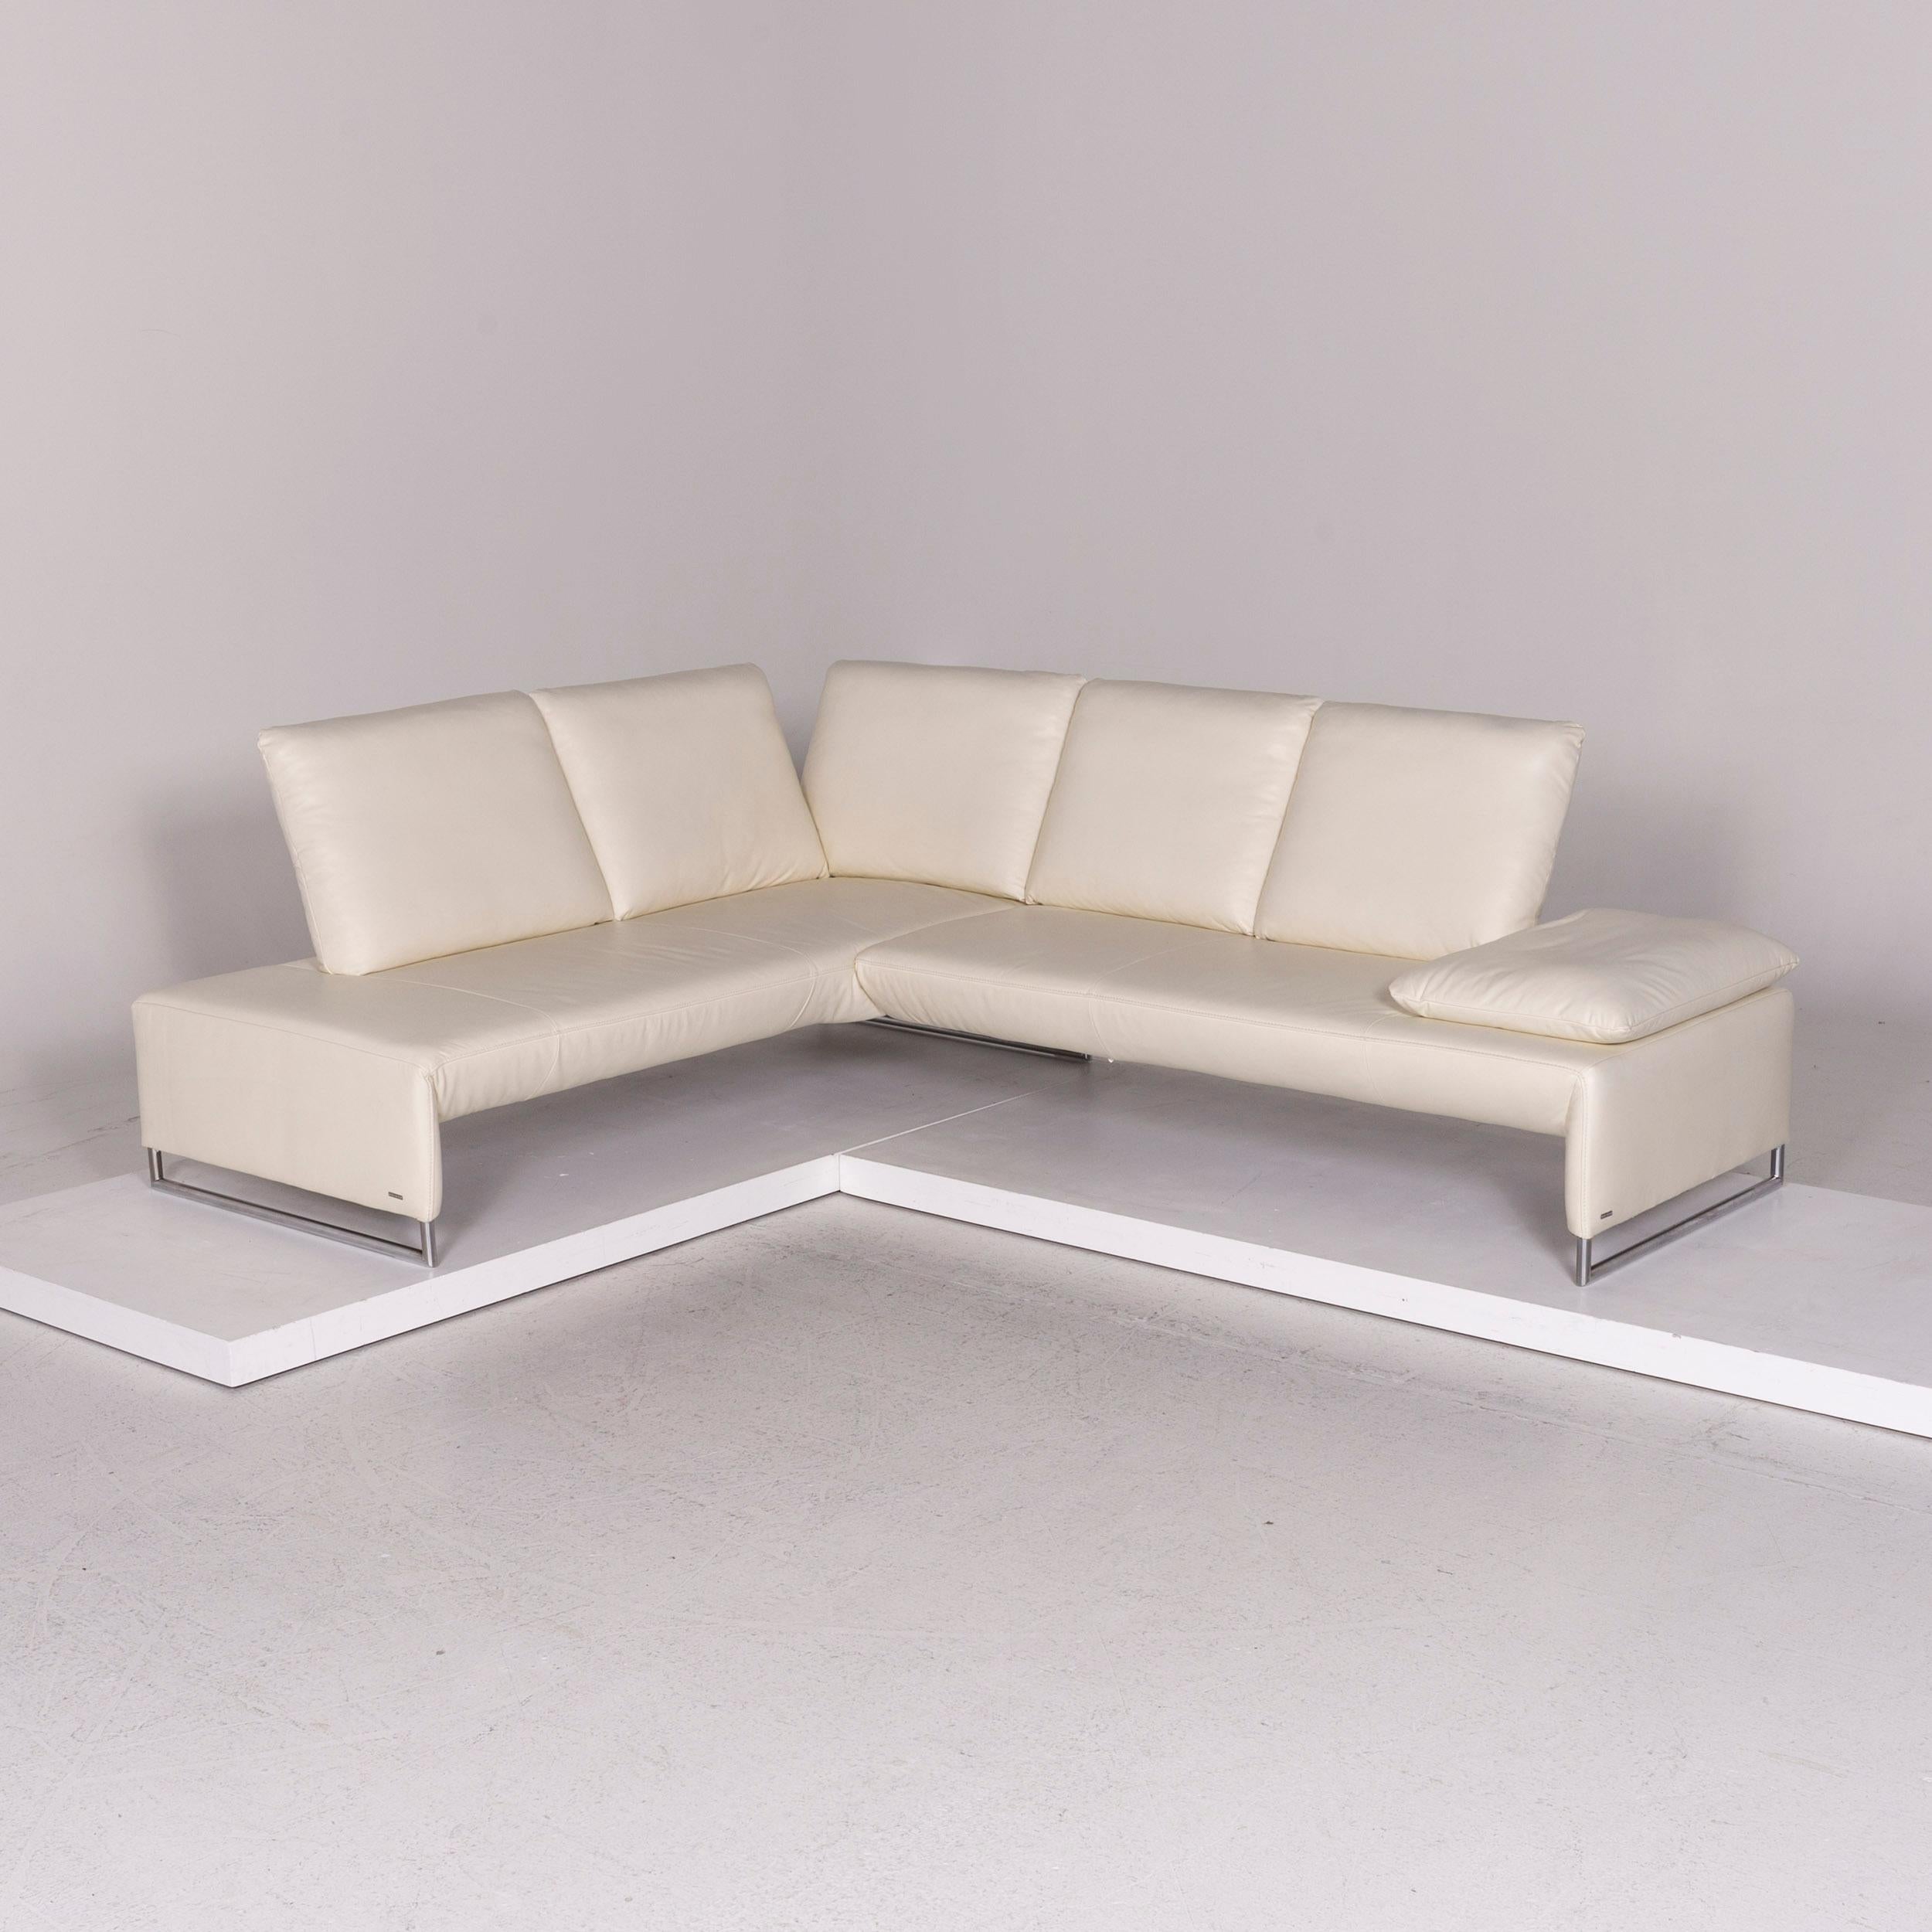 We bring to you a Koinor leather corner sofa cream sofa function couch.


 Product measurements in centimeters:
 

 Depth 87
Width 205
Height 81
Seat-height 42
Rest-height 52
Seat-depth 56
Seat-width 173
Back-height 45.
   